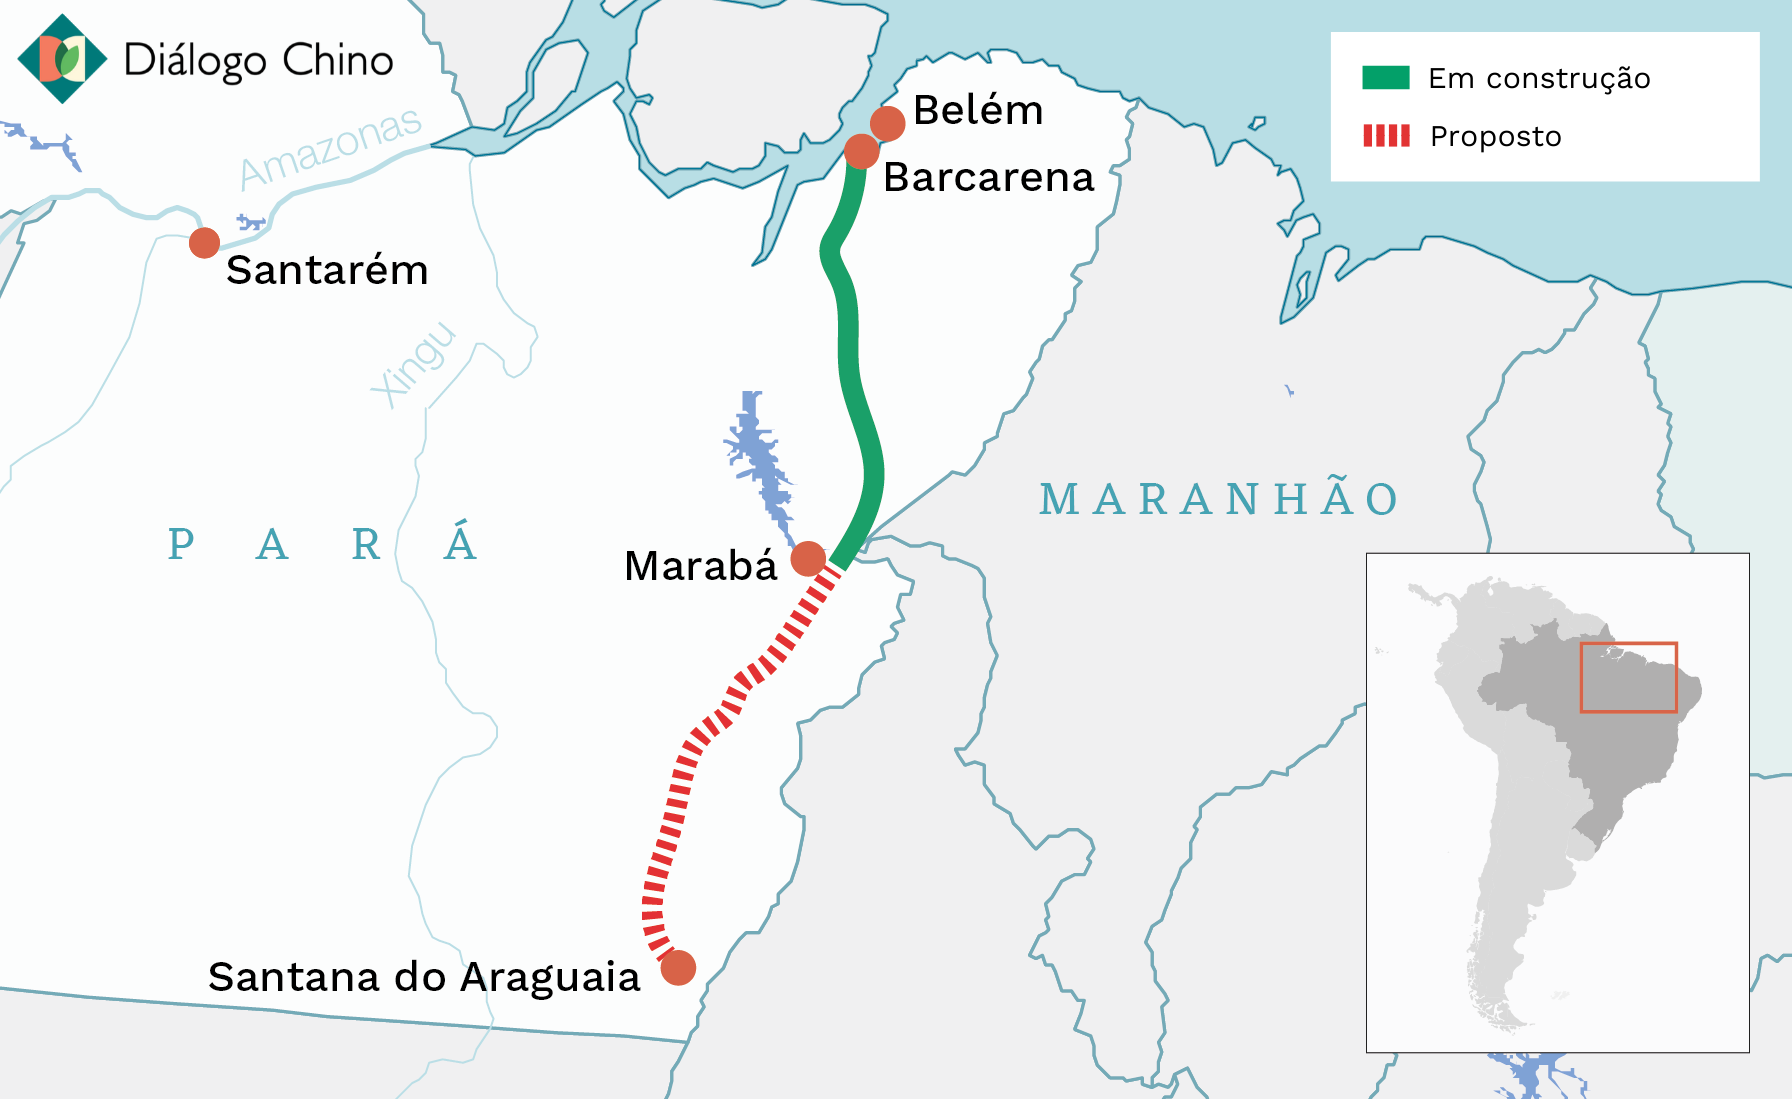 map showing the extent of the railway project in Pará, Brazil